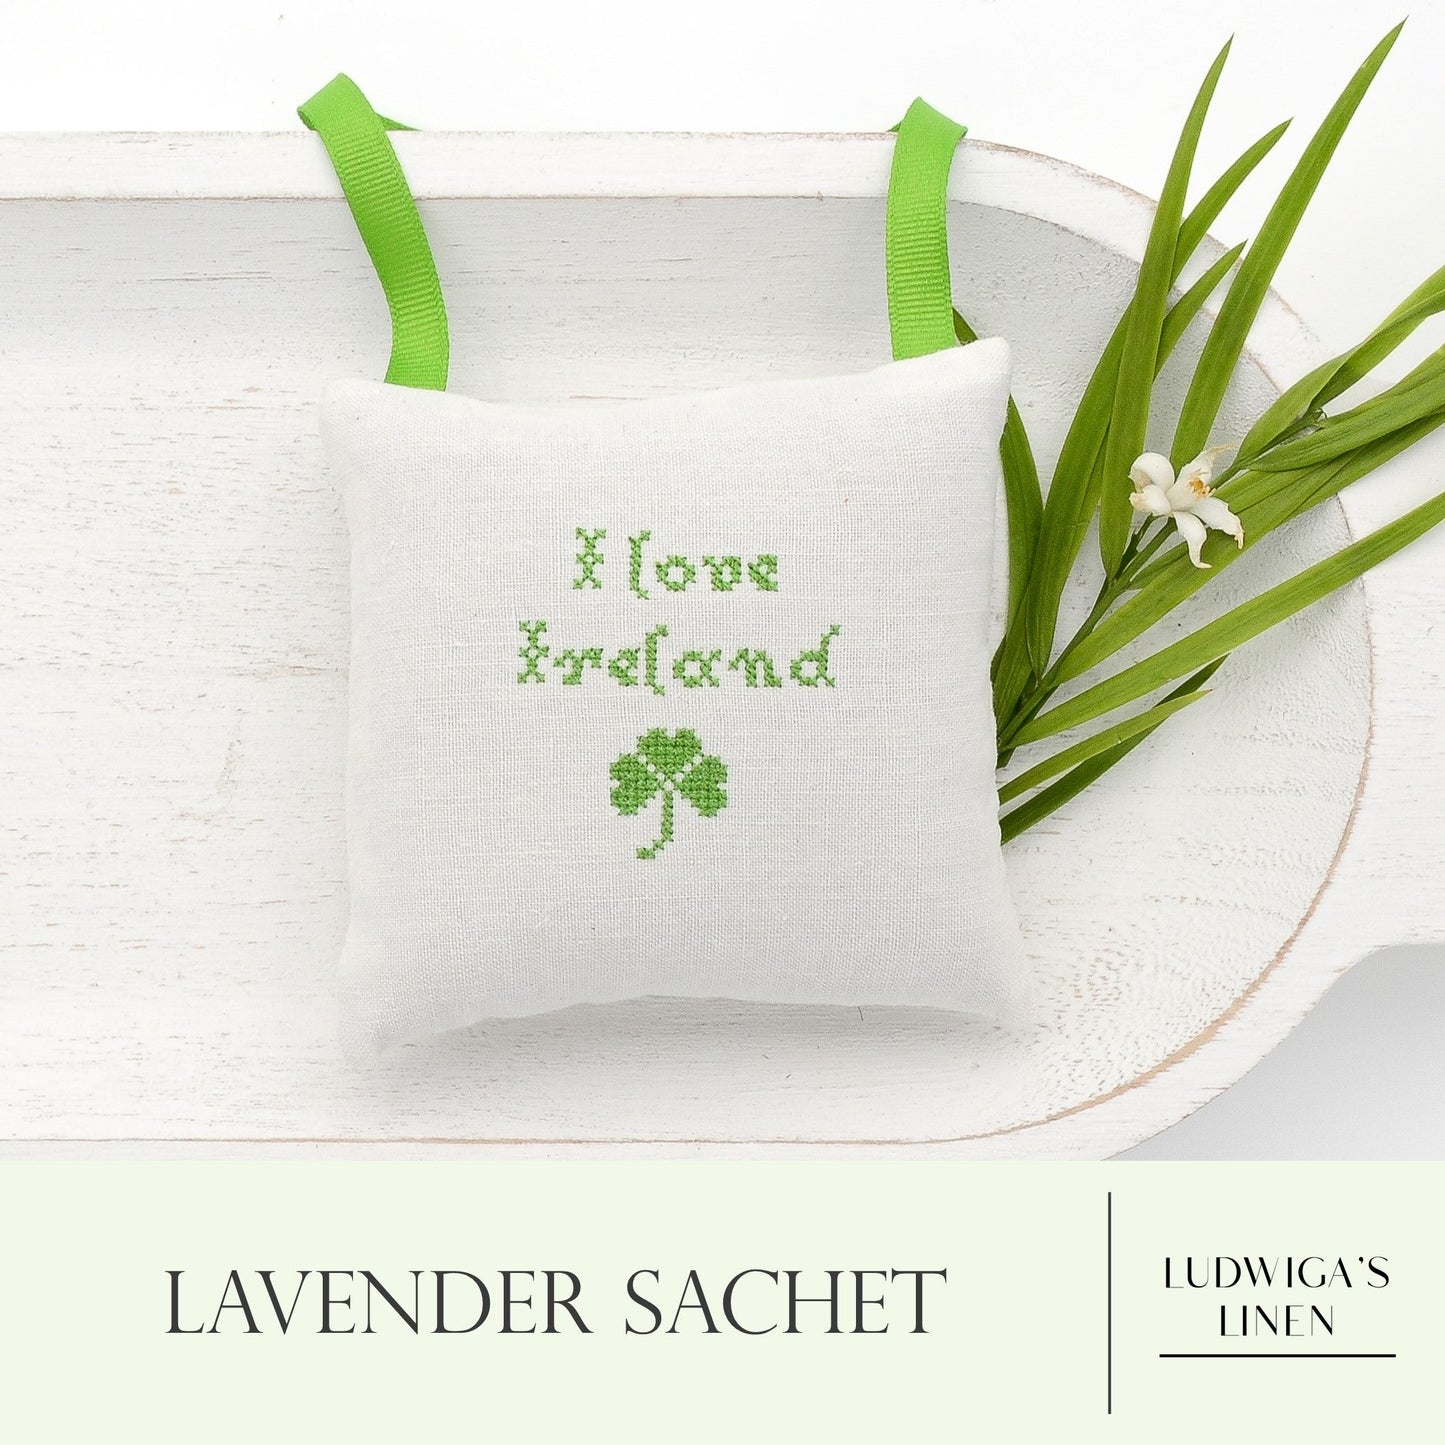 Antique/vintage French/German linen lavender sachet square, green gros grain ribbon tie and filled with high quality lavender from Provence France